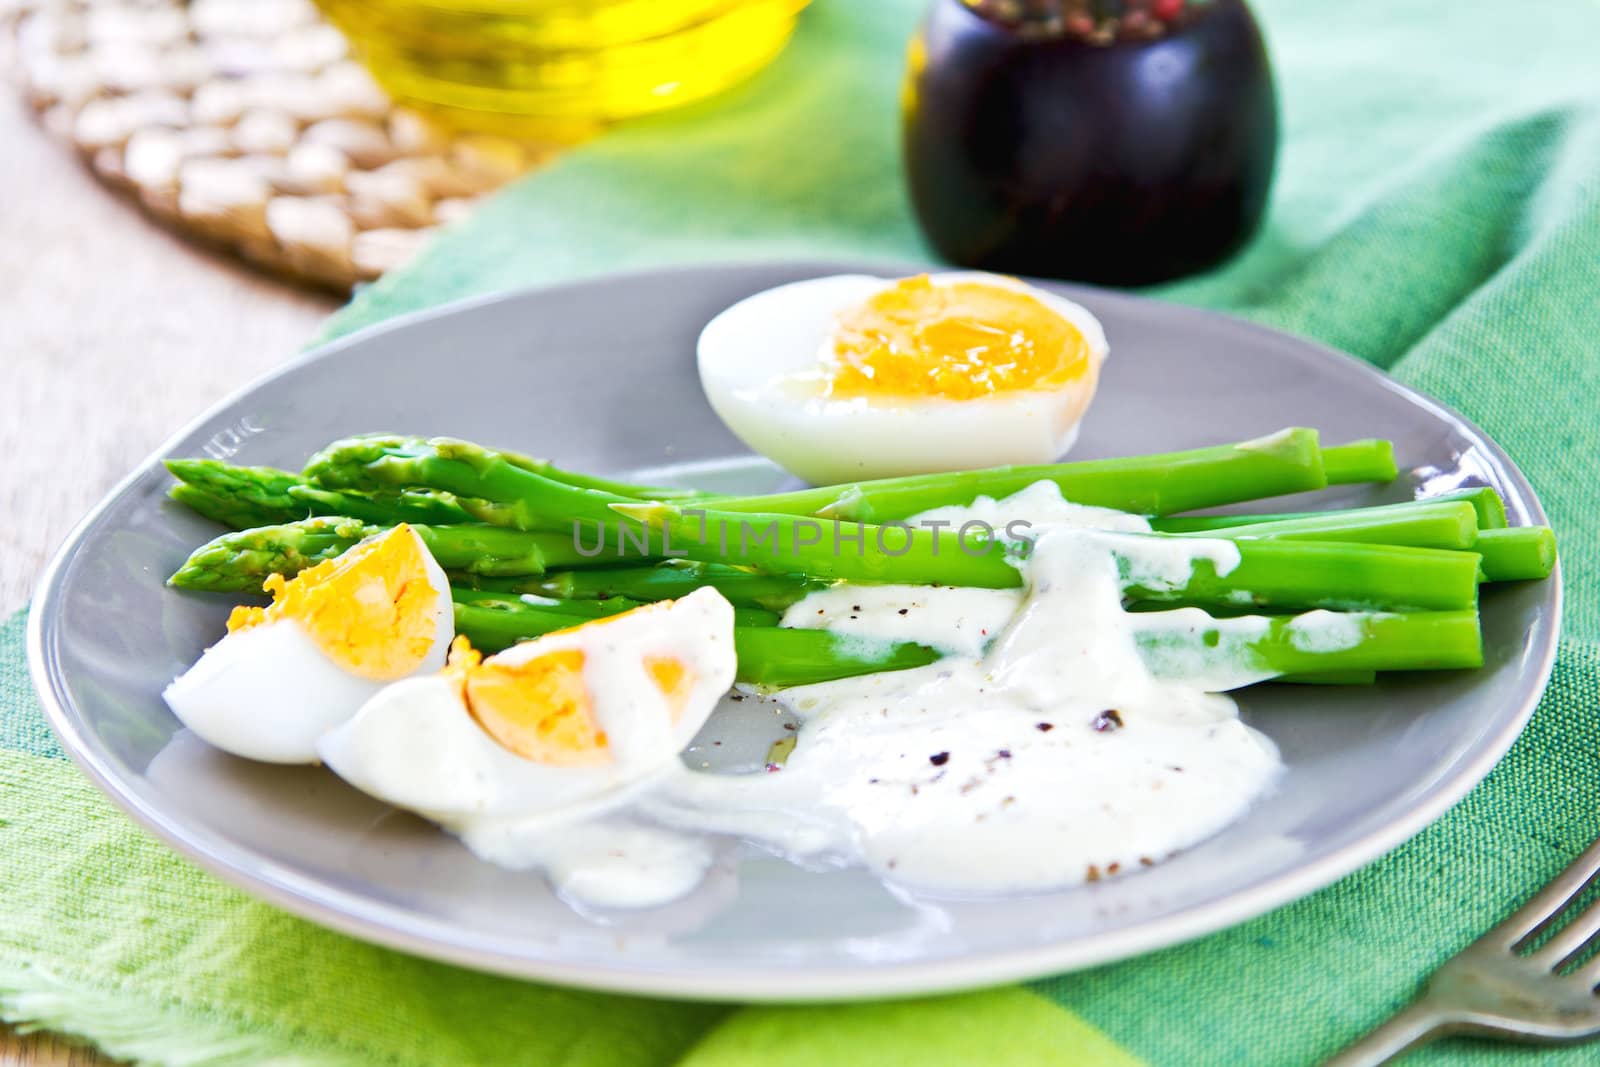 Steamed Asparagus with boiled eggs and sour cream dressing